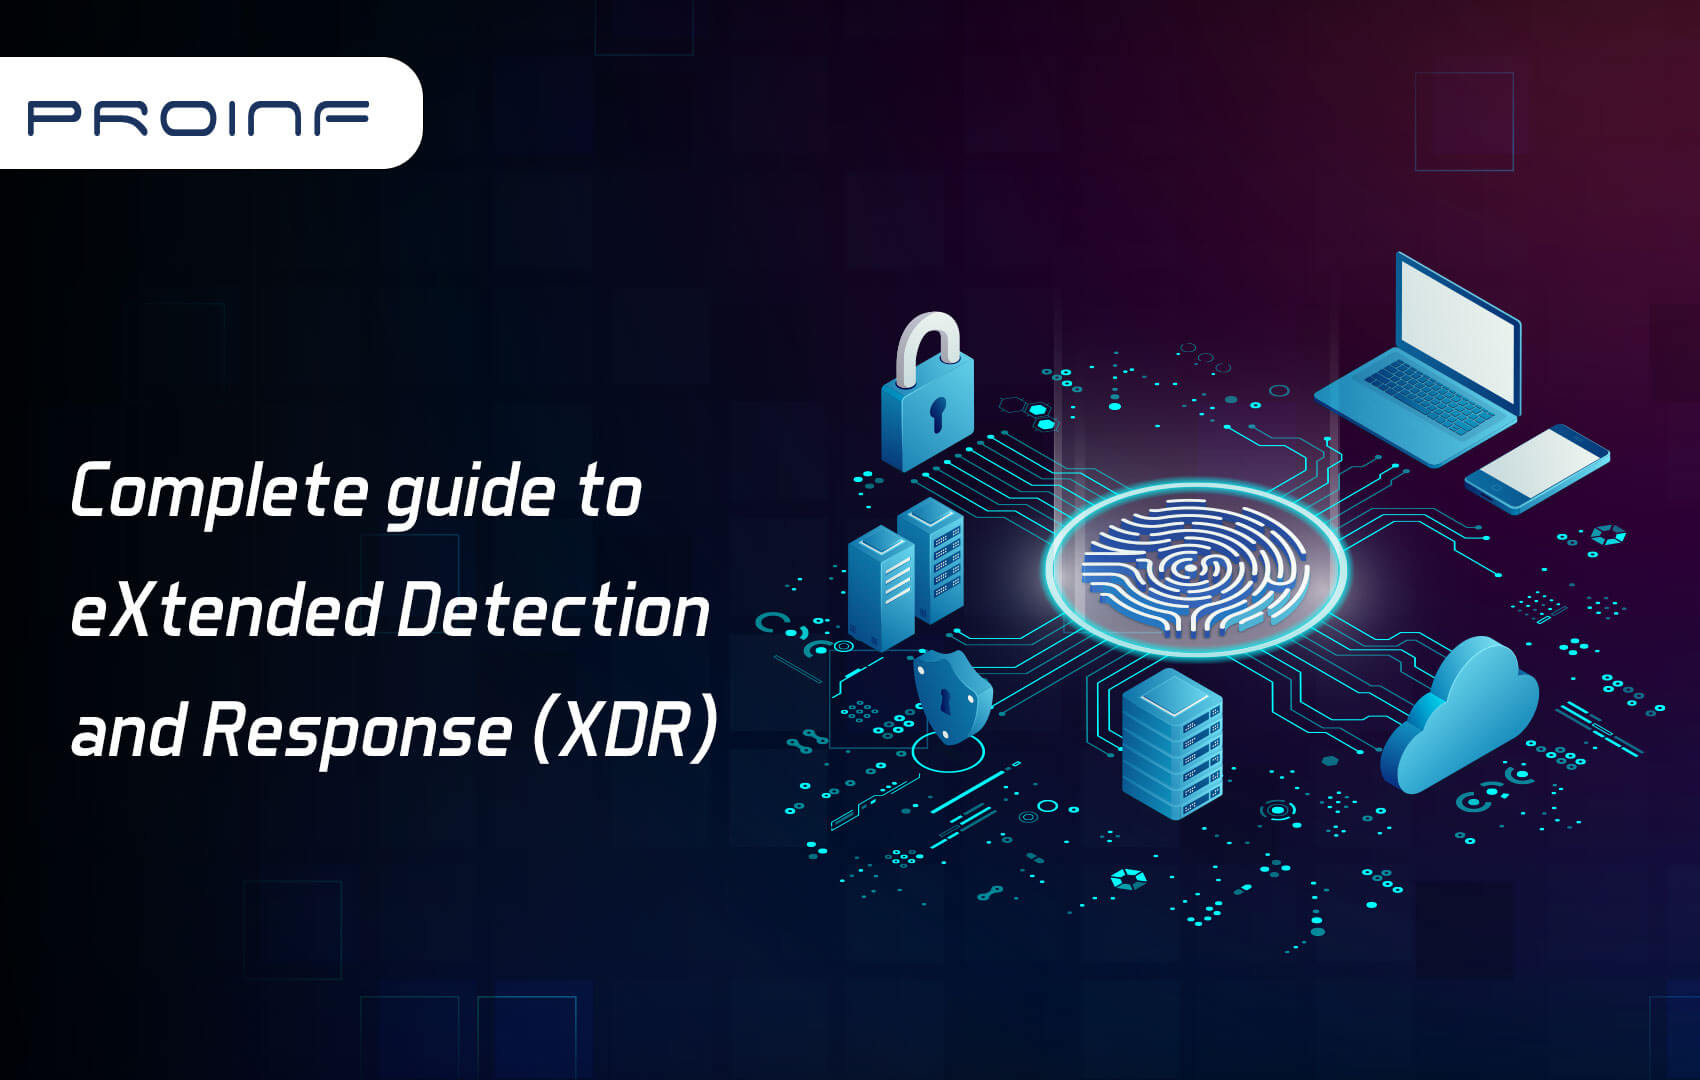 Complete guide to eXtended Detection and Response (XDR)